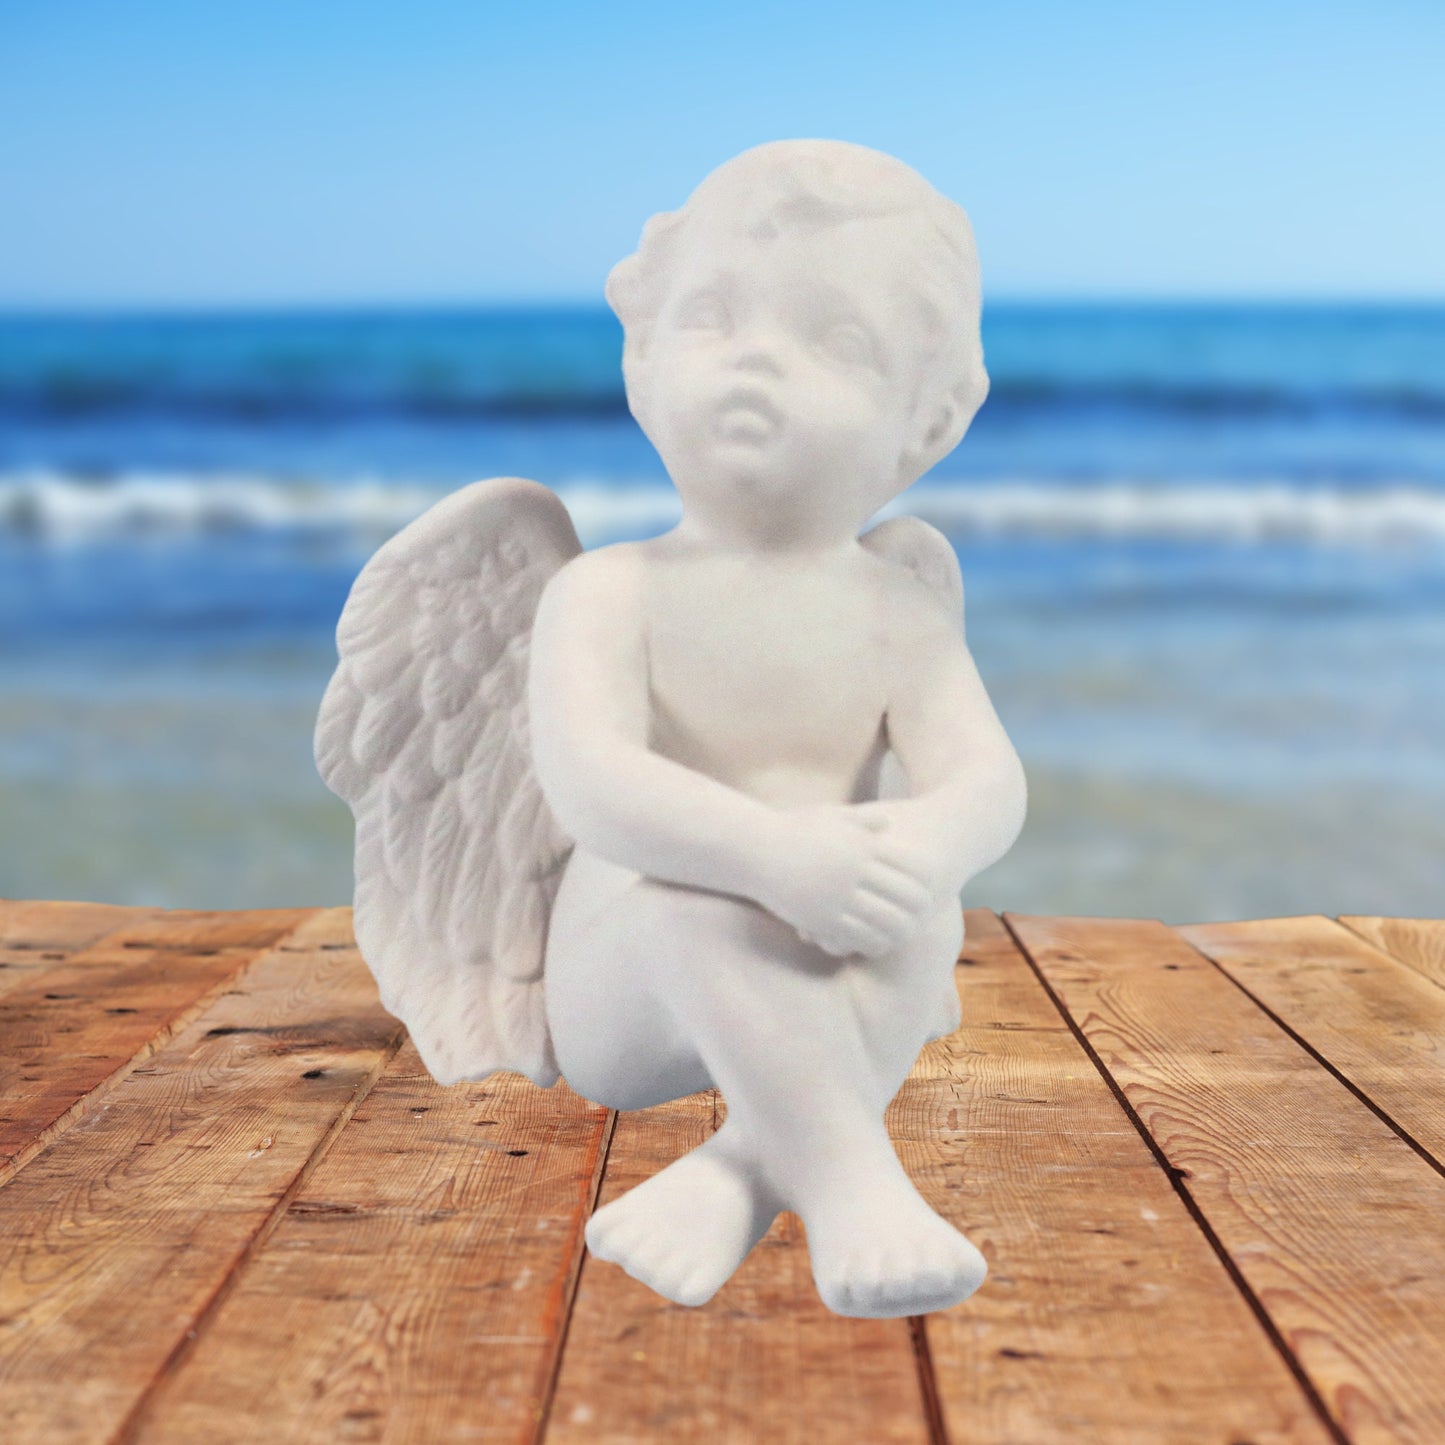 Ready to paint cherub figurine sitting on a talbe by the ocean.  Its knees are up, feet crossed, and his hands are clasped and resting on his knees.